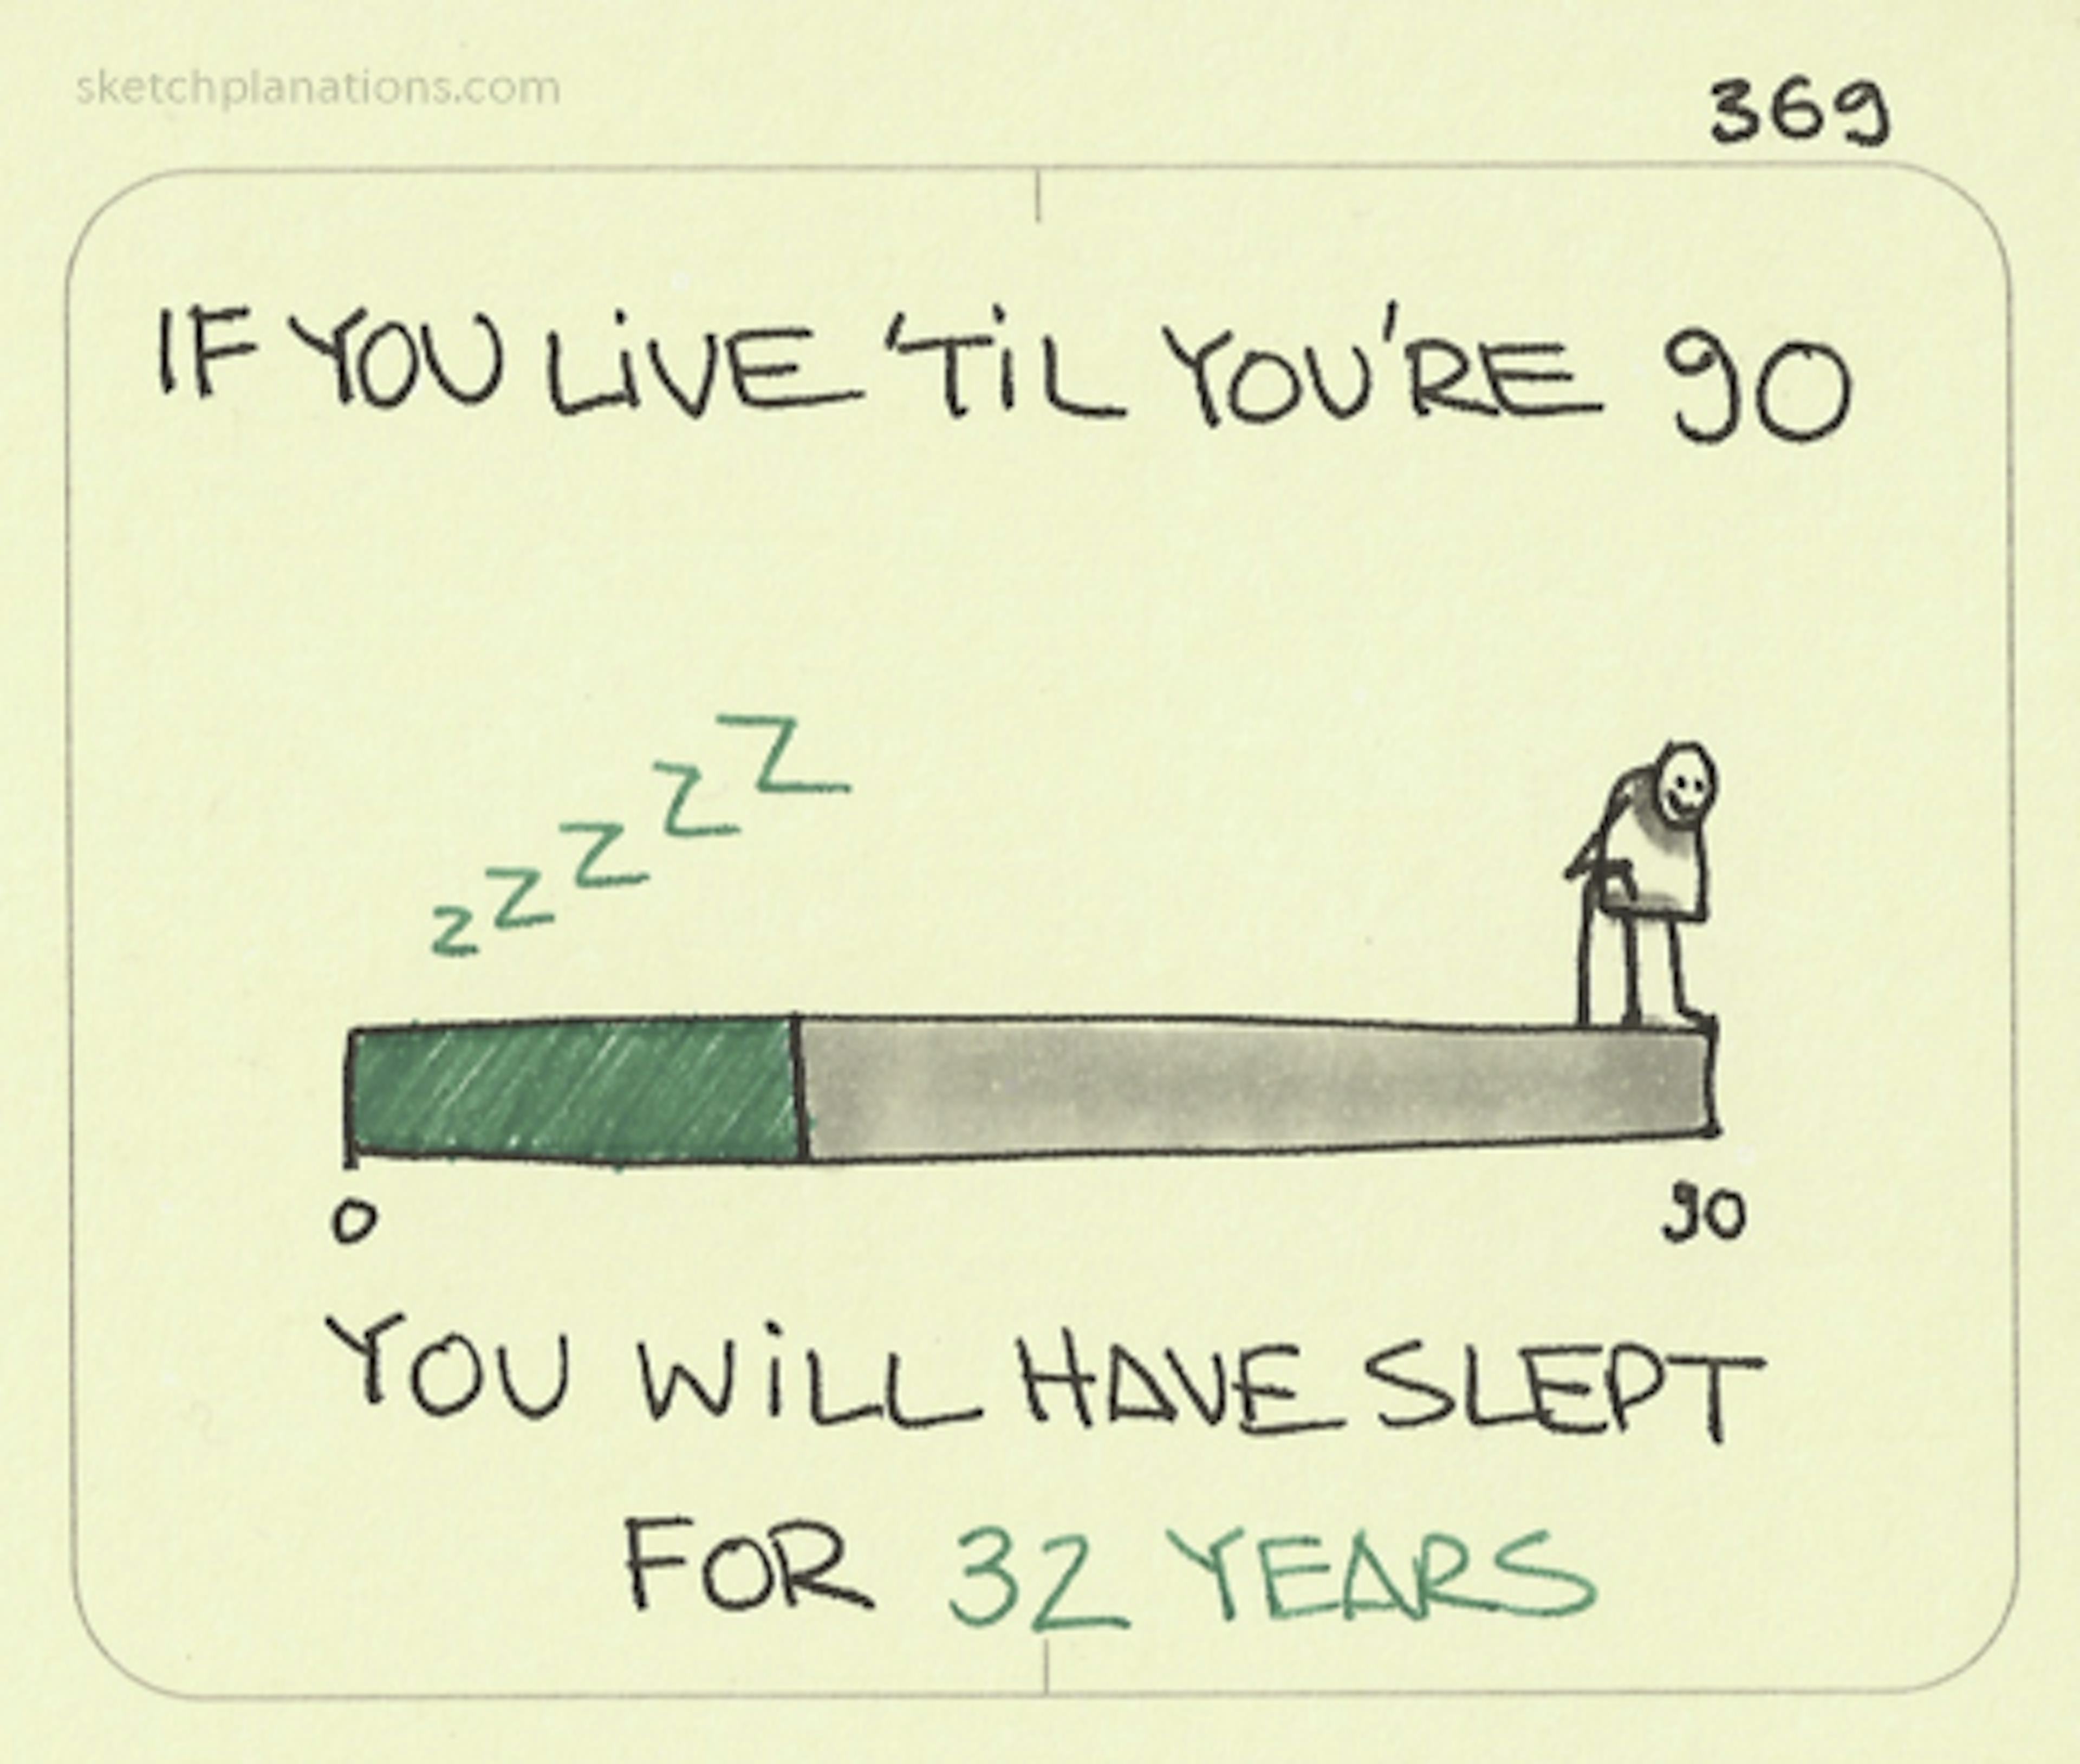 If you live ‘til you’re 90 you will have slept for 32 years - Sketchplanations